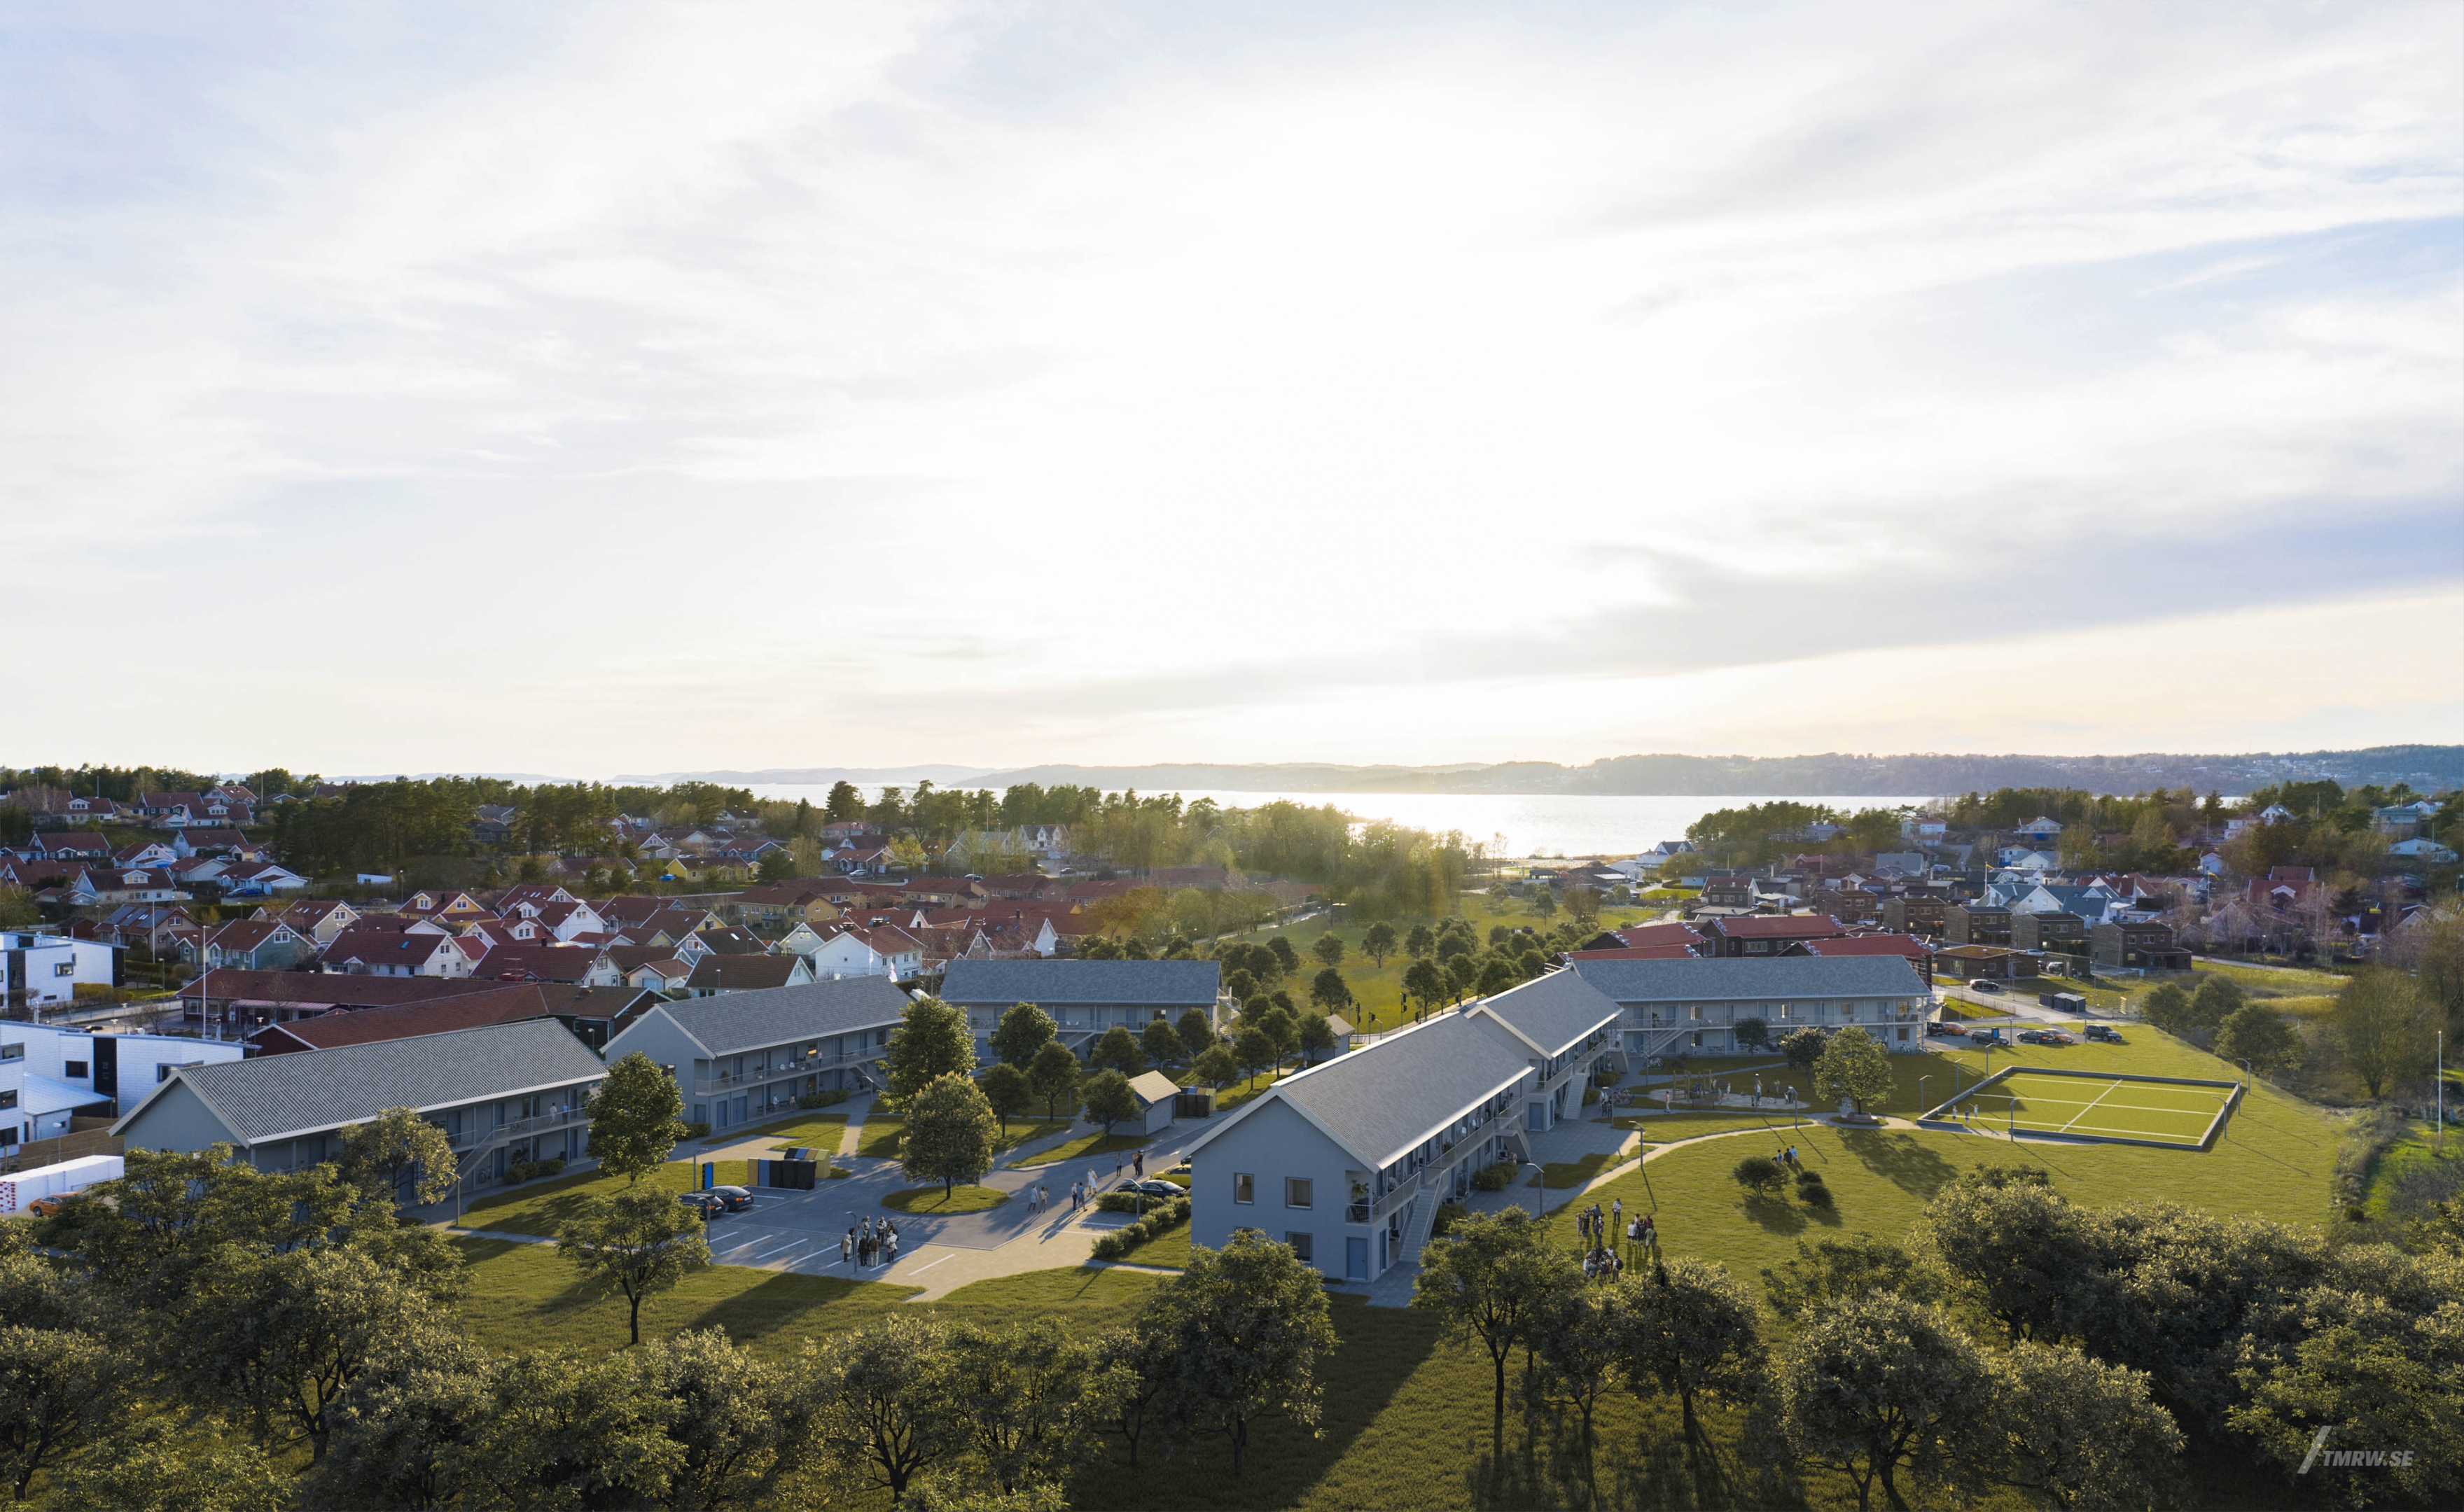 Architectural visualization of Stora Höga for Riksbyggen, aerial of residential area, beautiful light